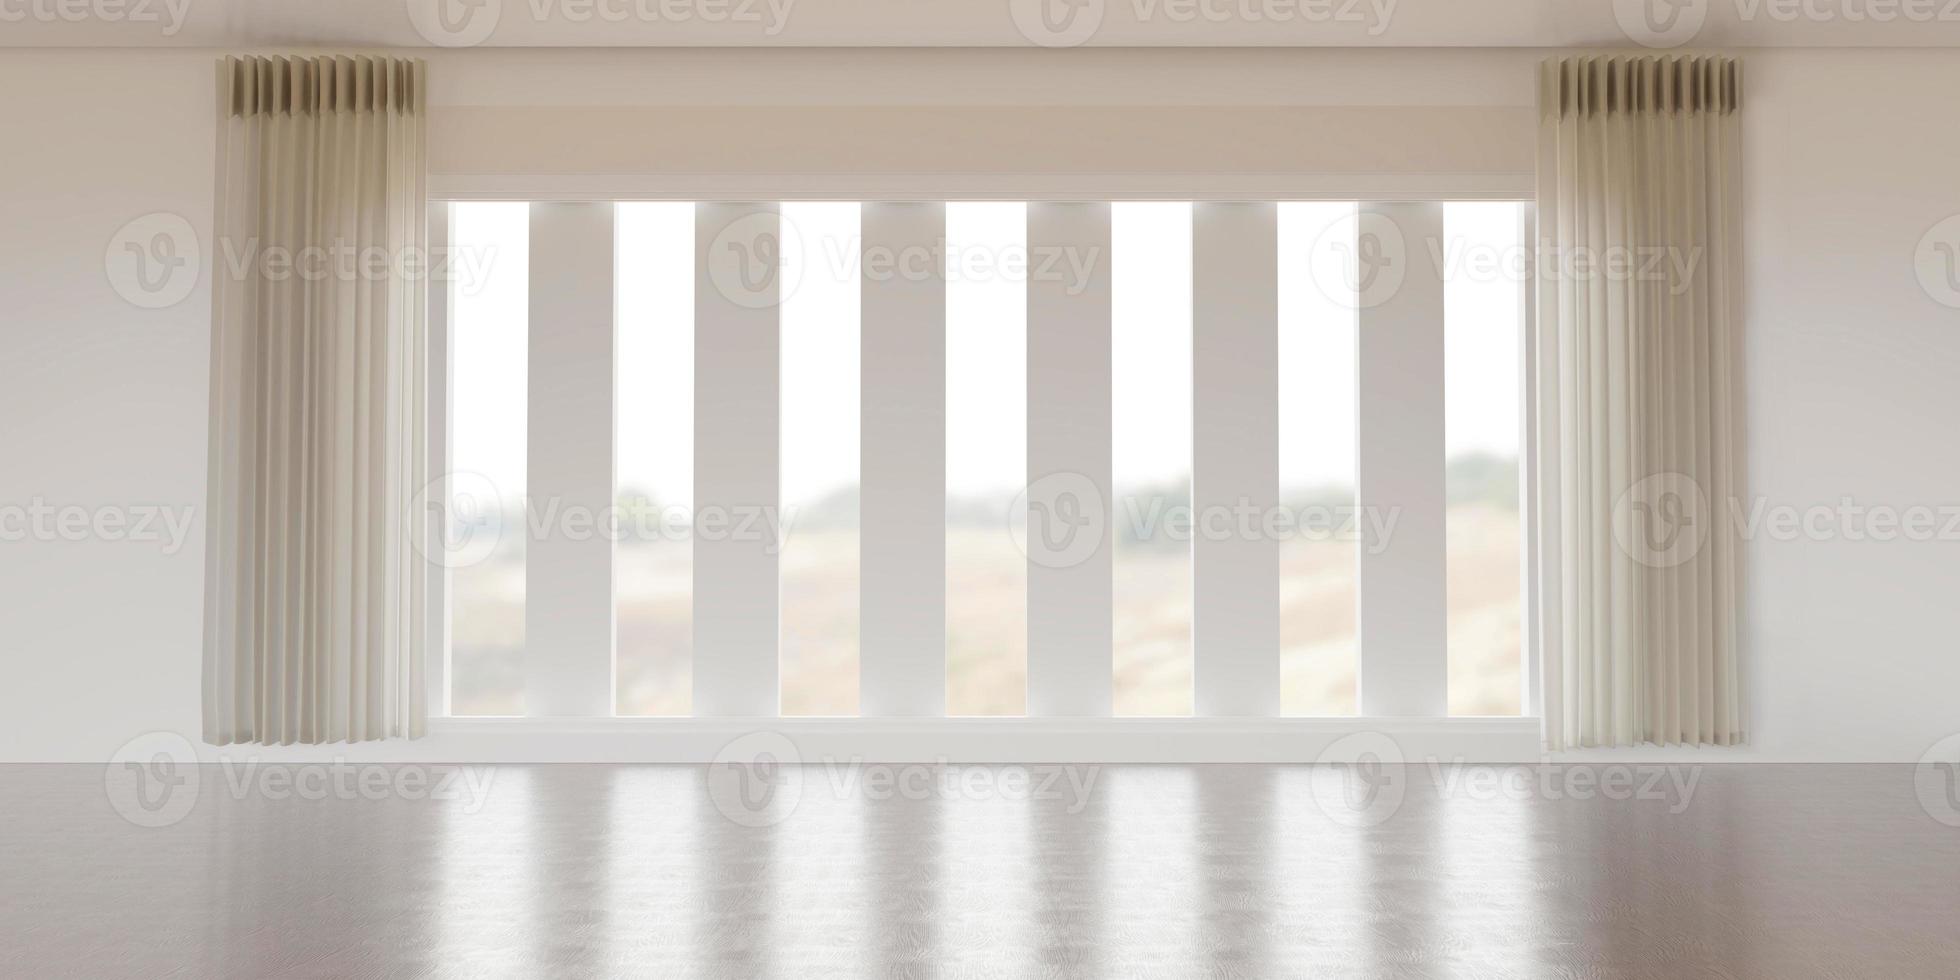 Wooden floors and walls Curtains and large windows wide open room There is a large glass window 3D illustration photo